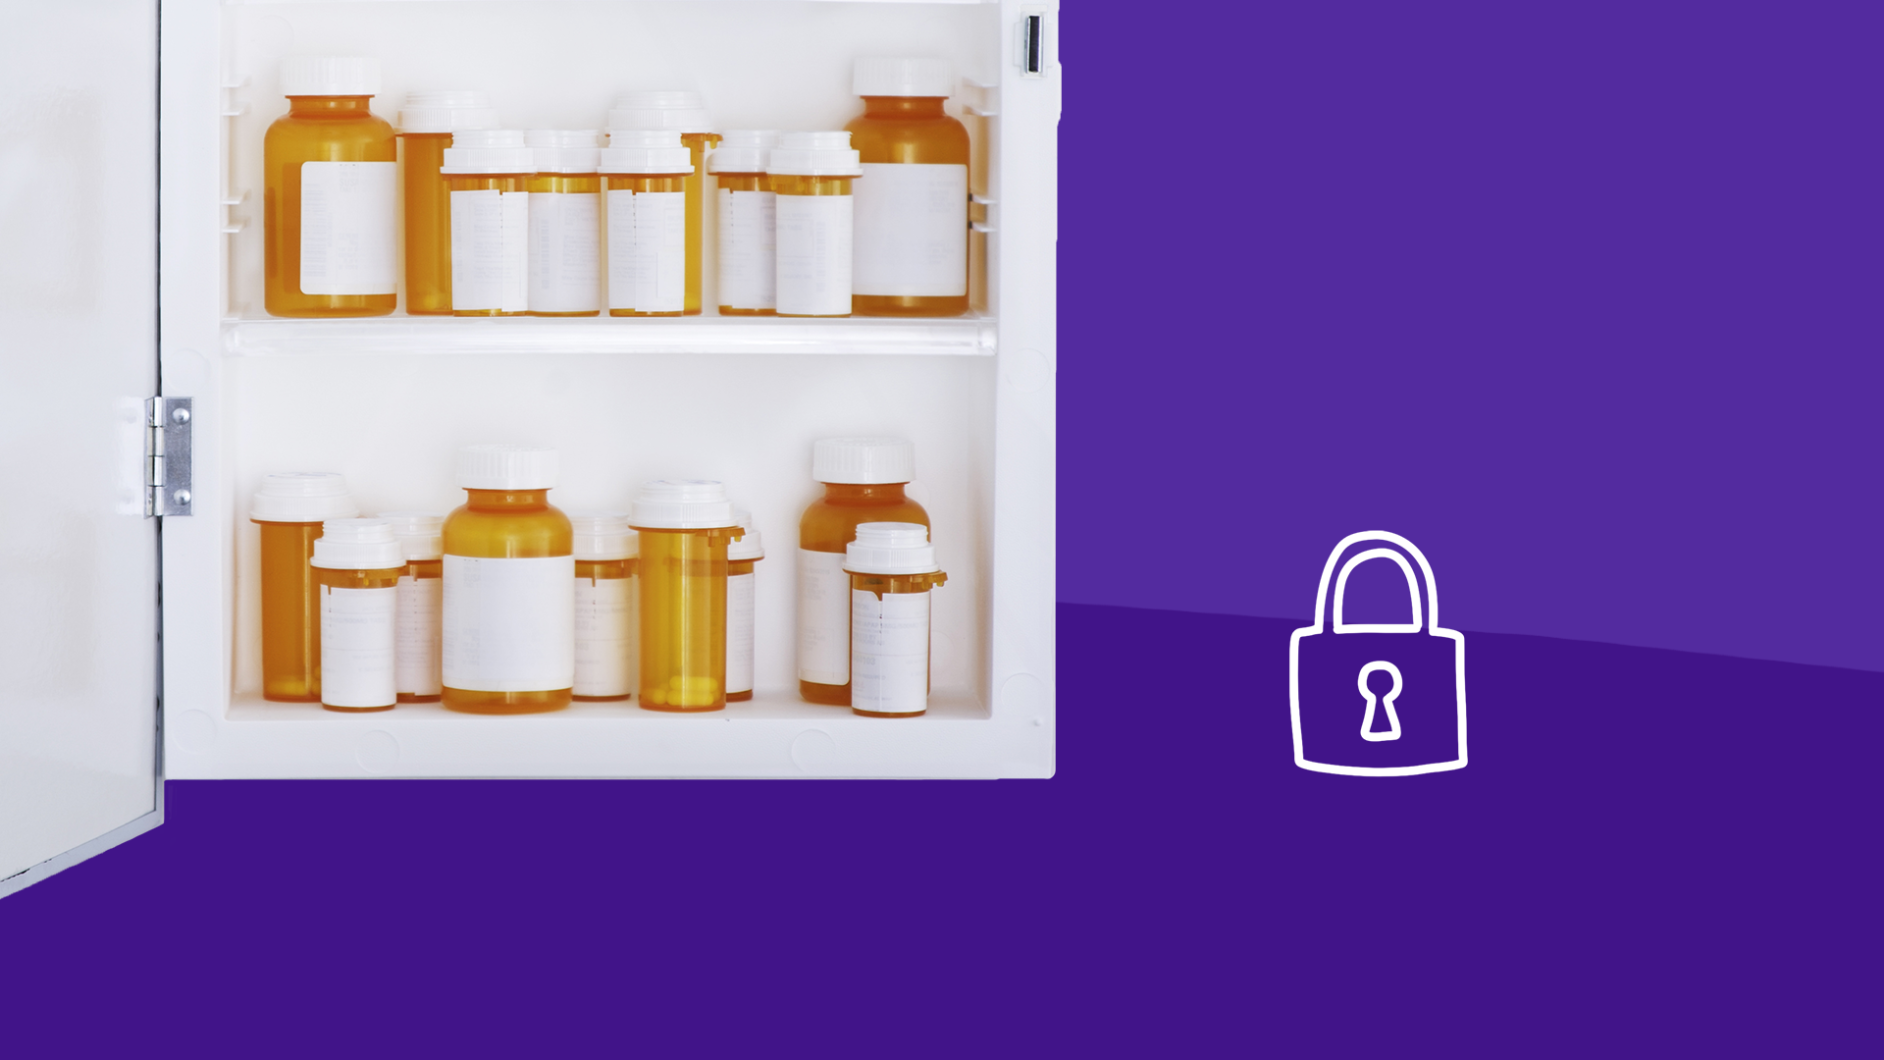 Home medication safety guide–how to keep kids and pets safe